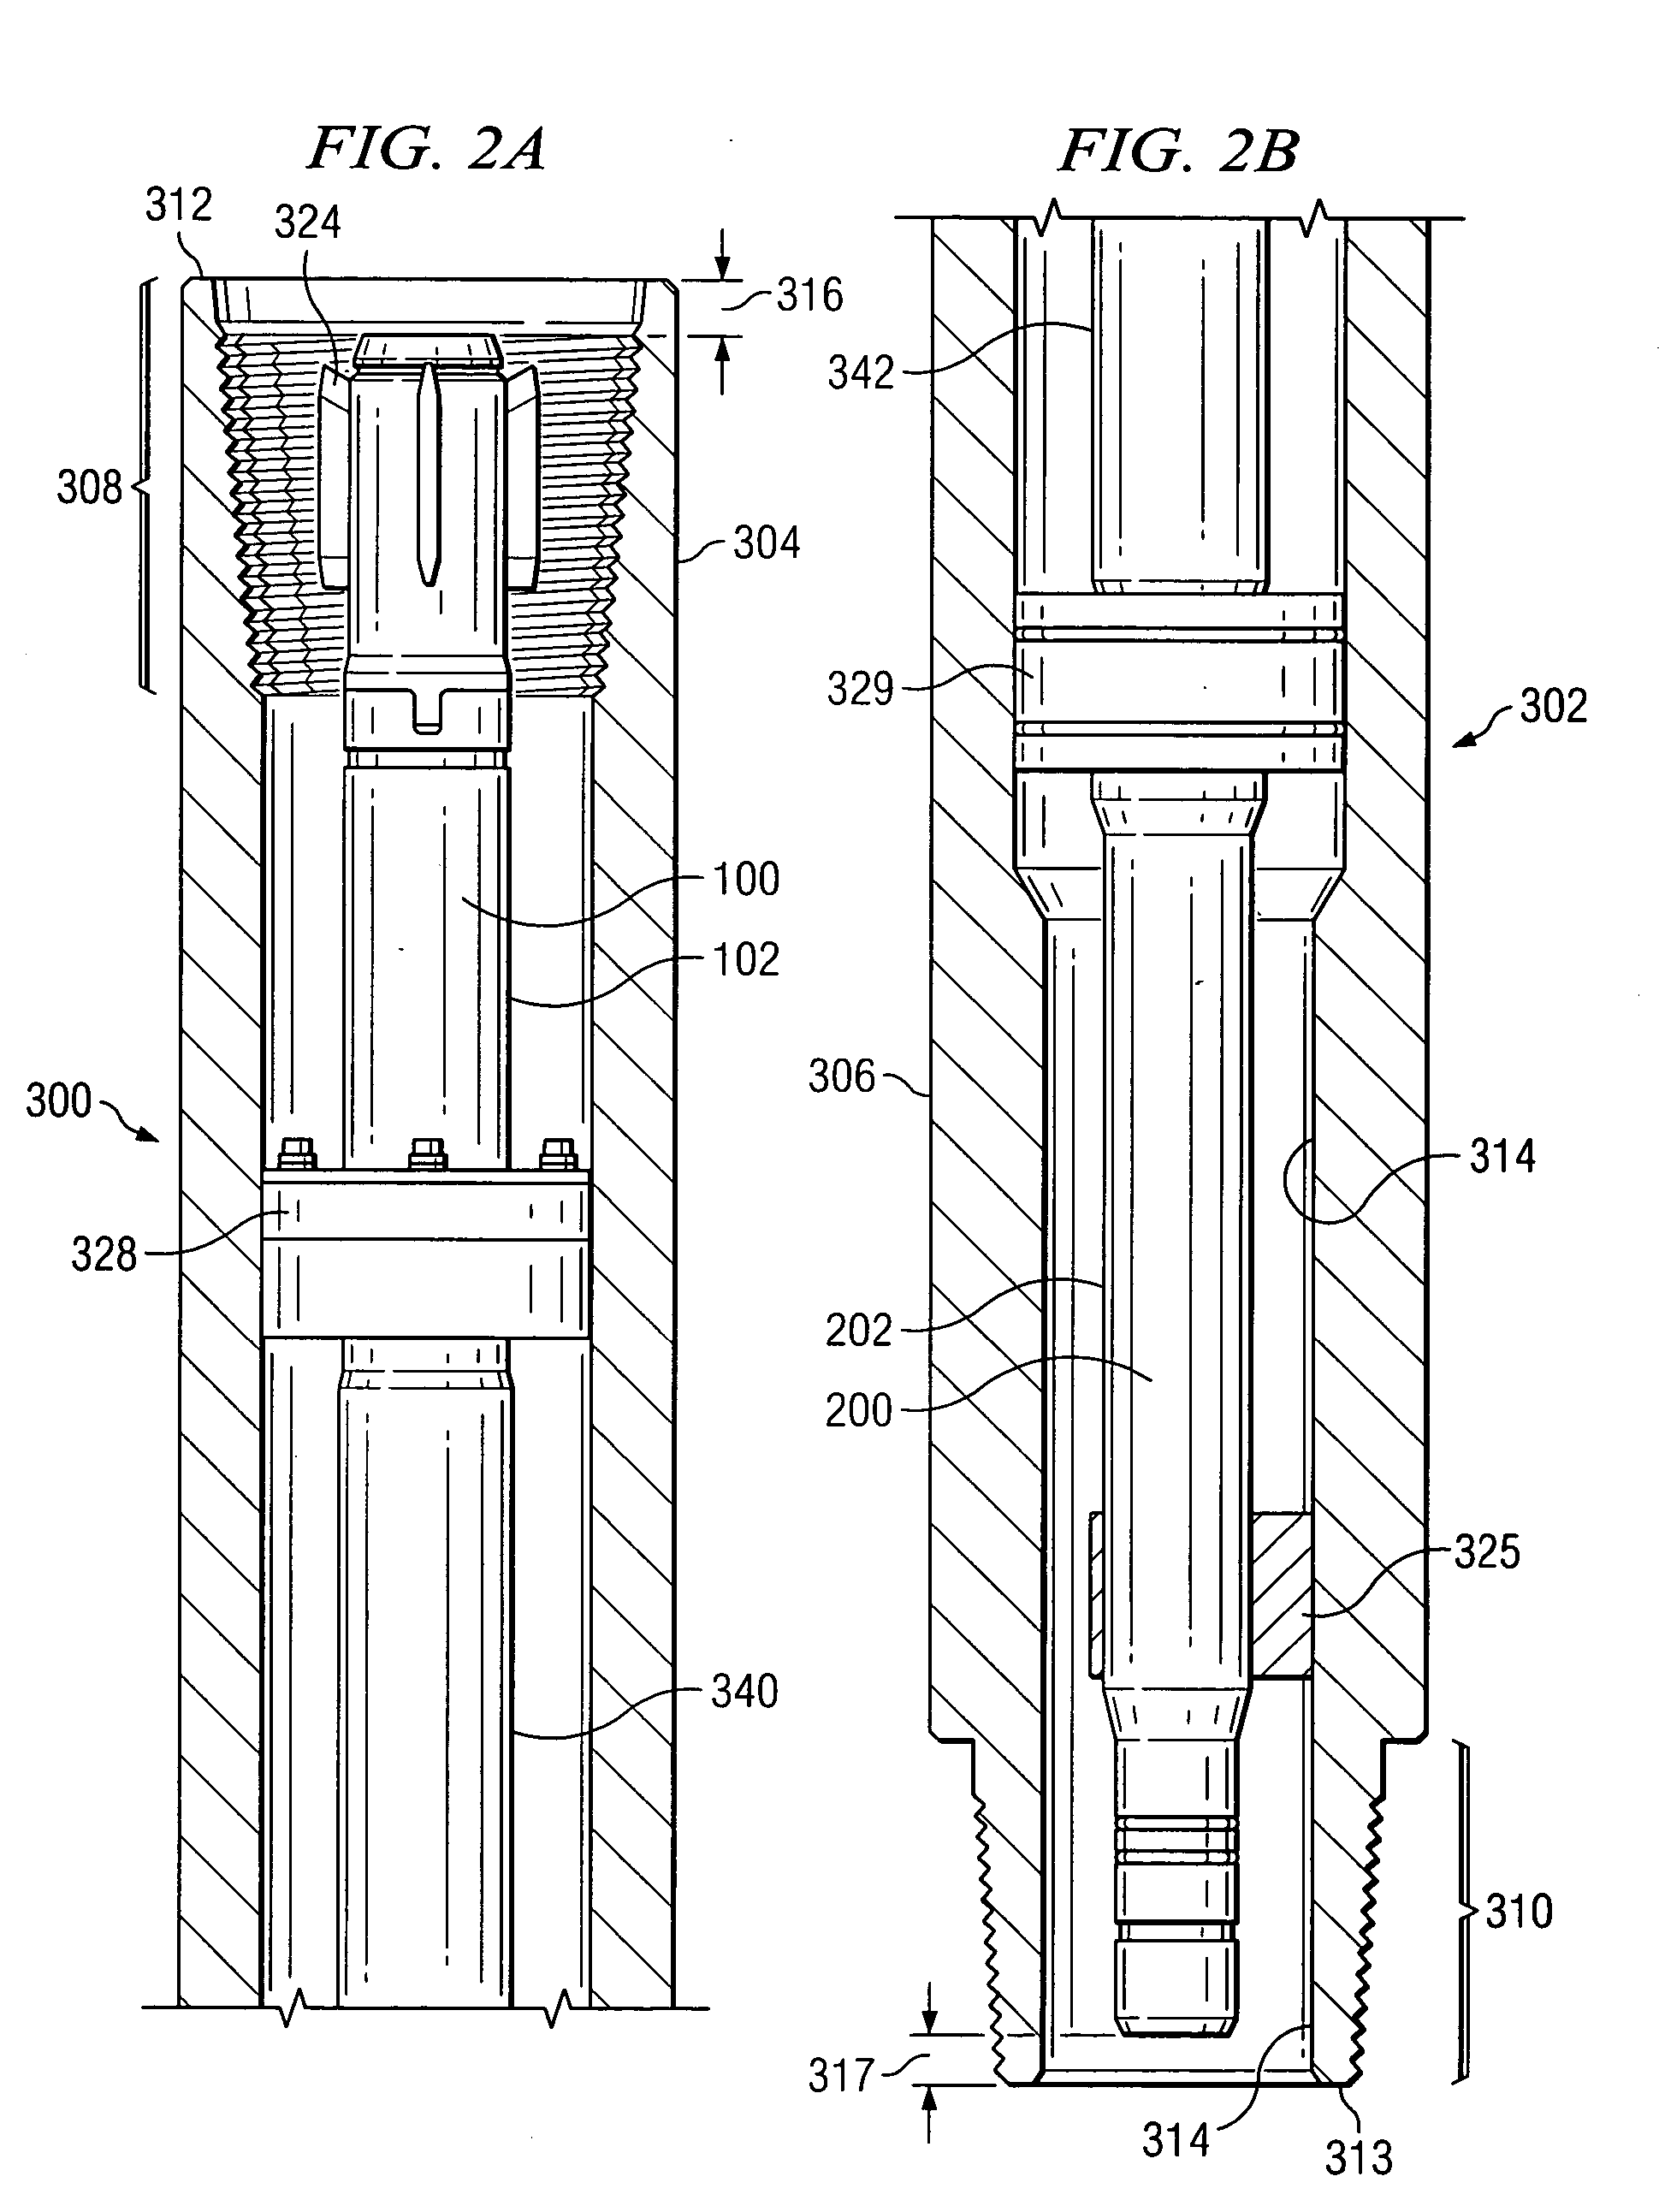 Electrical connector useful in wet environments